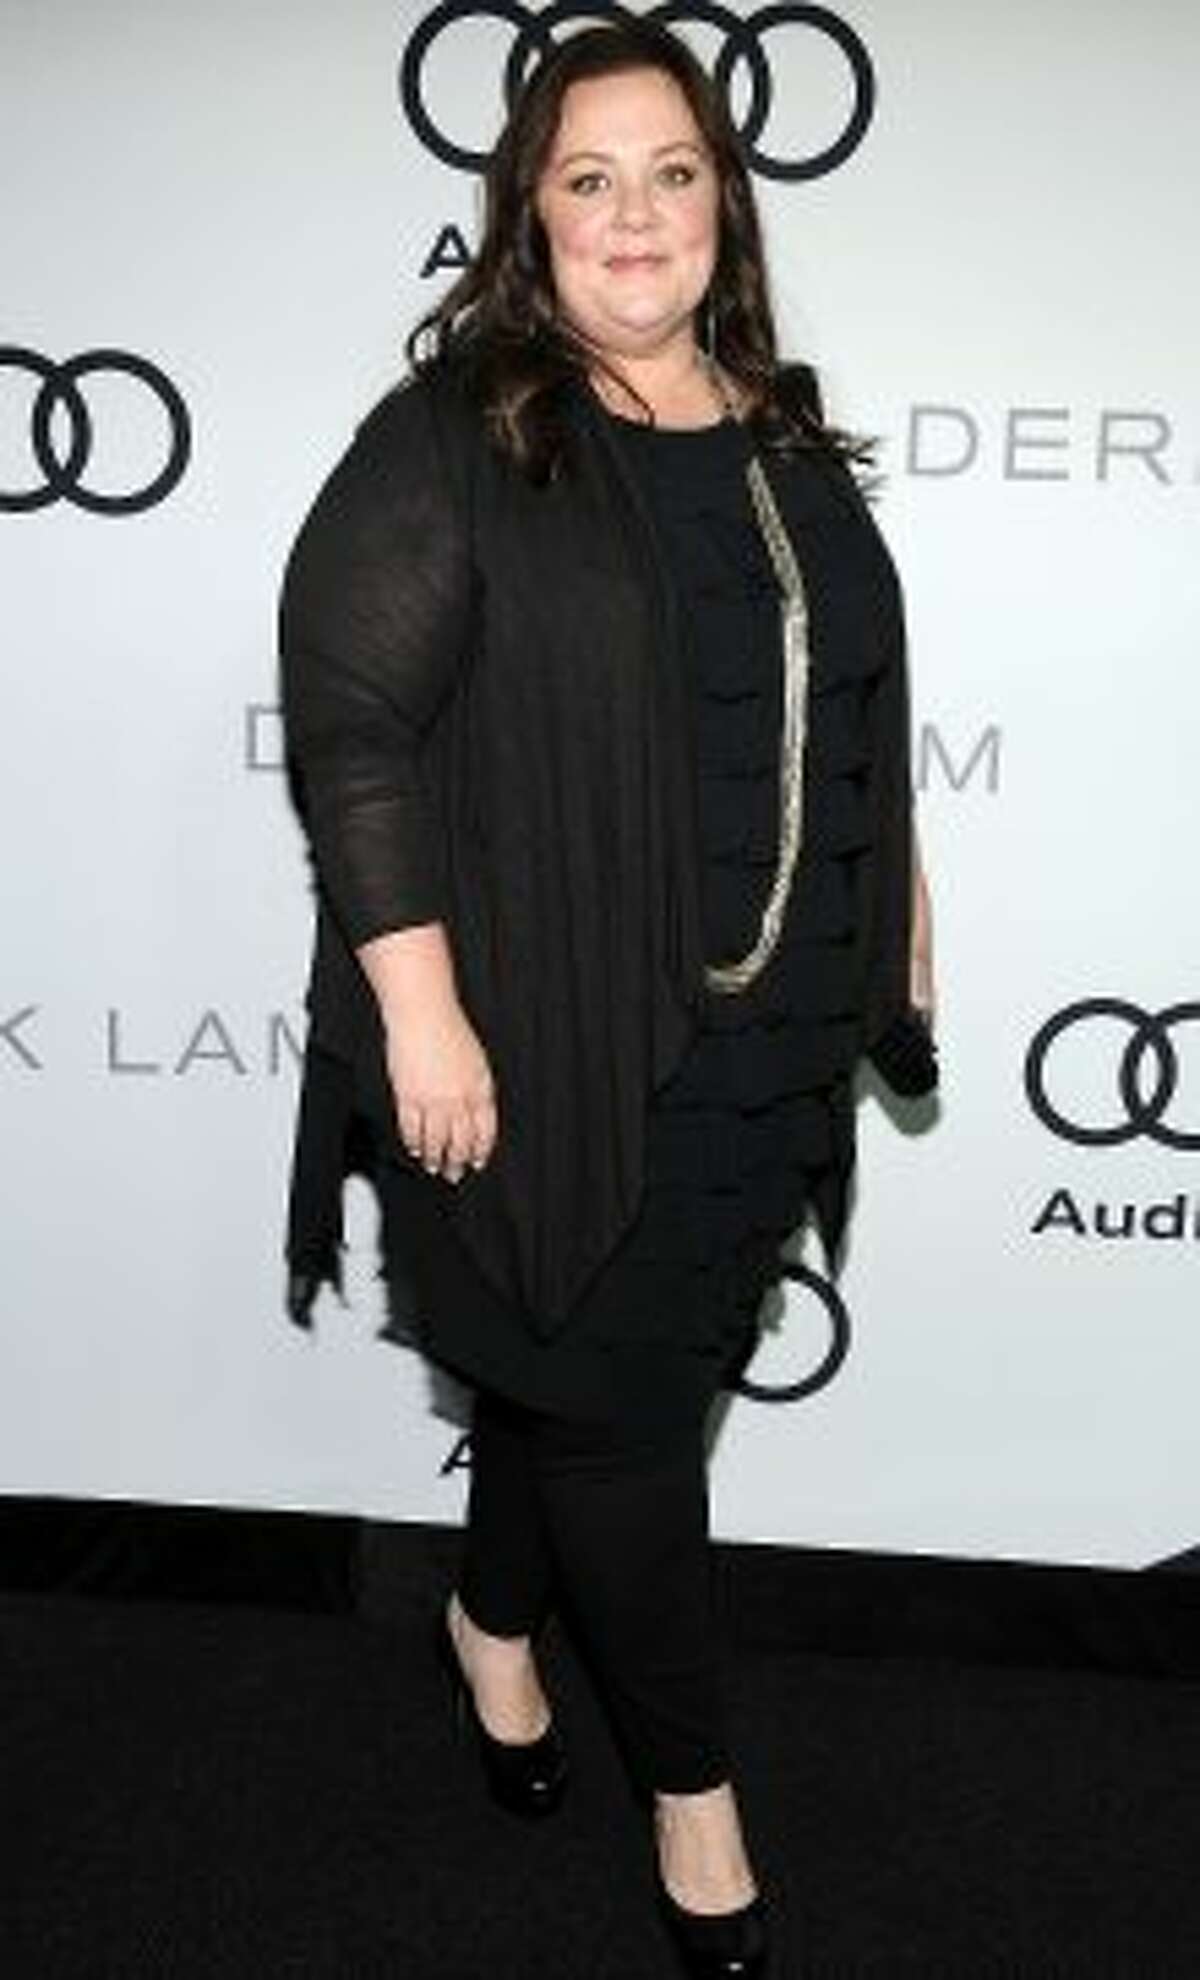 Actress Melissa McCarthy arrives at Audi And Derek Lam Kick Off Emmy Week 2012 party at Cecconi's Restaurant on September 16, 2012 in Los Angeles, California. (Valerie Macon / Getty Images)